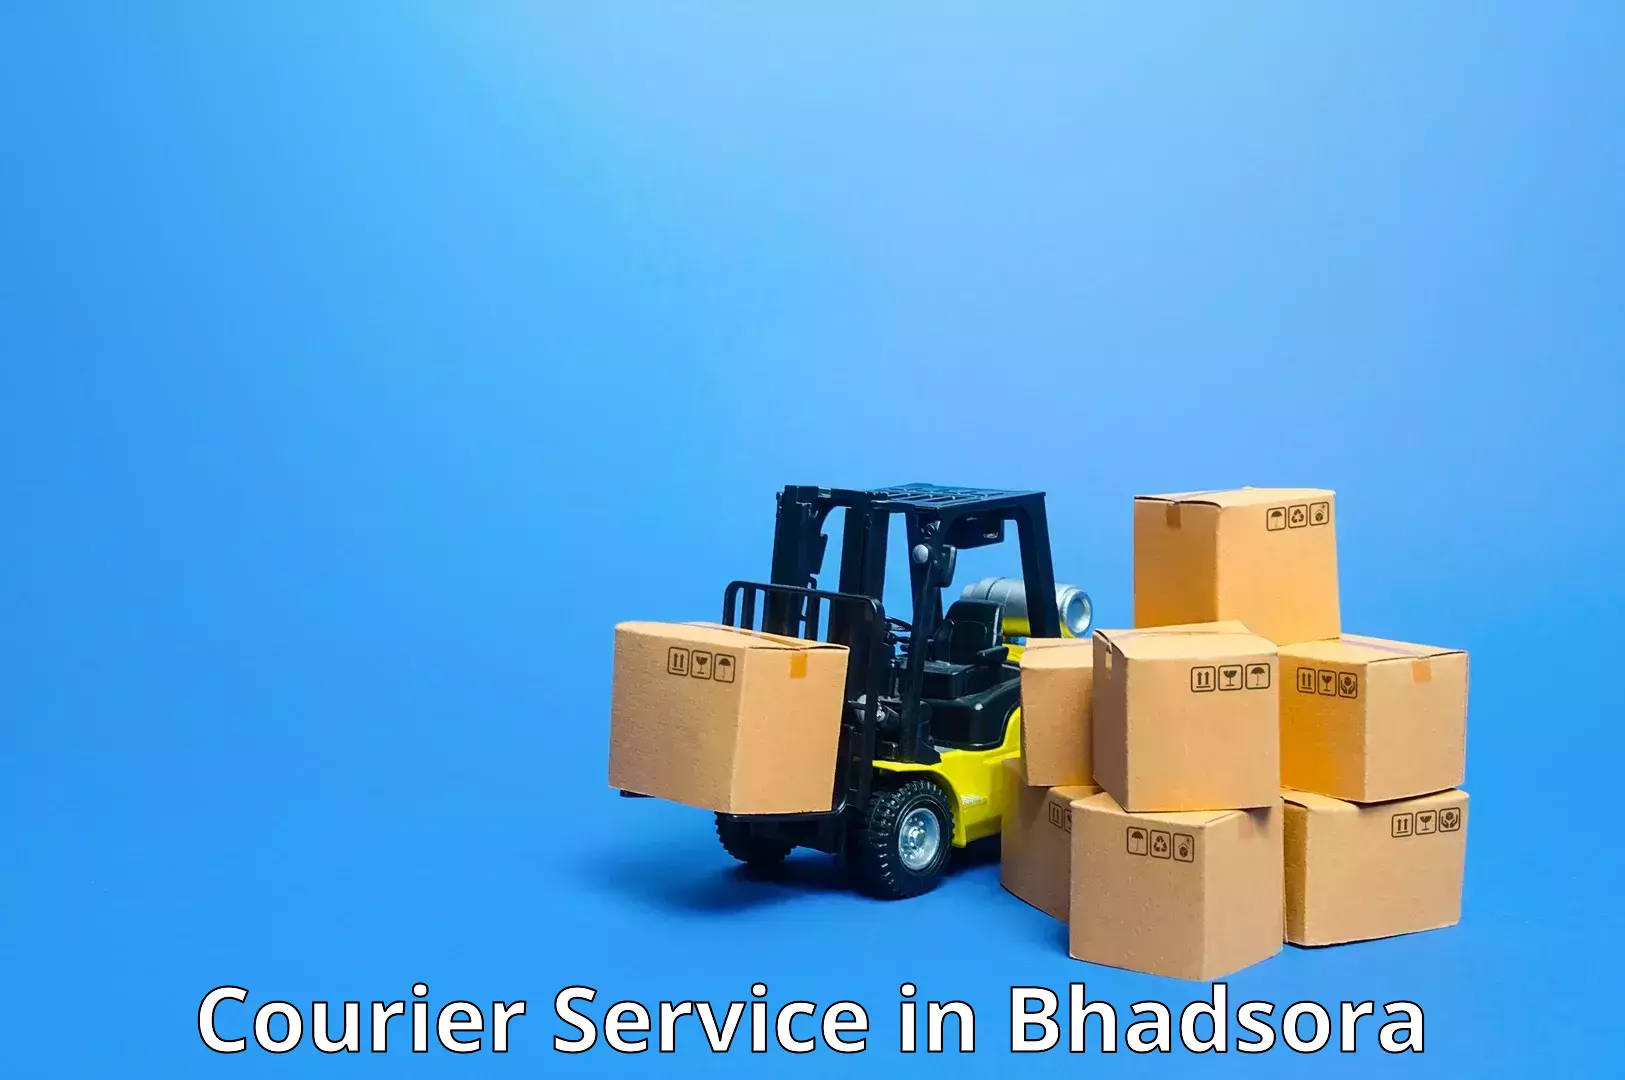 Parcel handling and care in Bhadsora